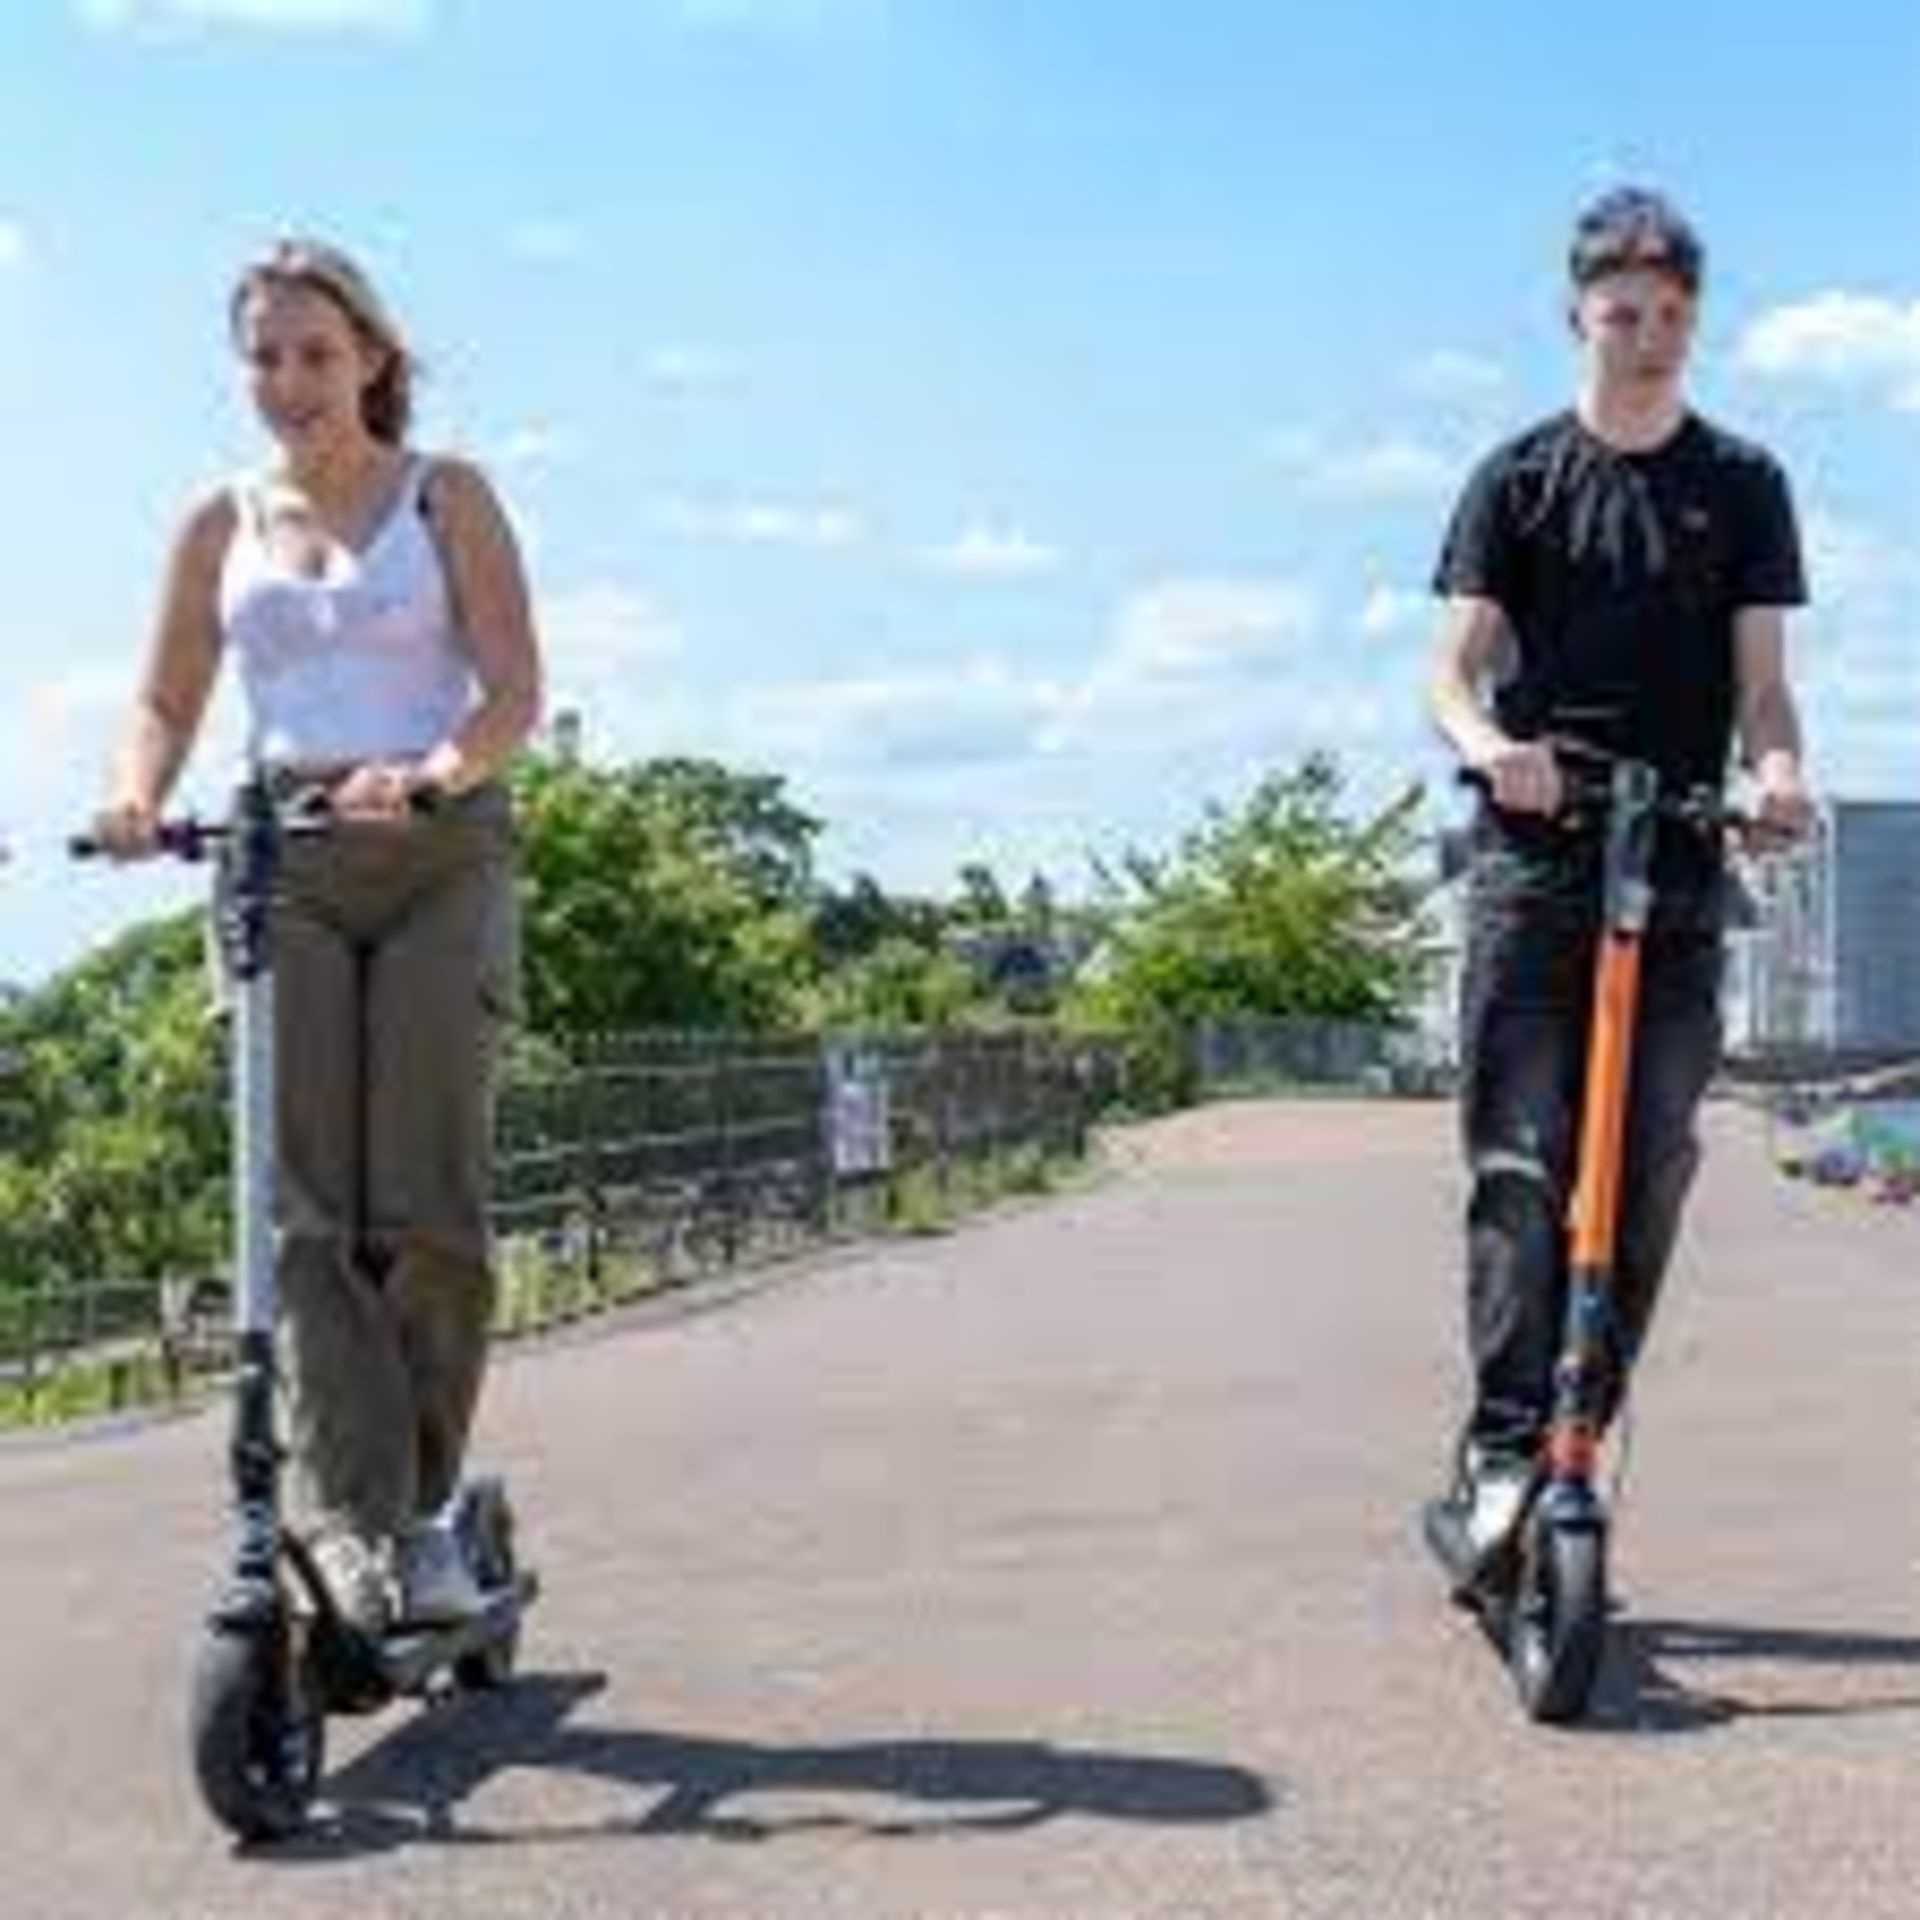 Brand New E-Glide V2 Electric Scooter Grey and Black RRP £599, Introducing a sleek and efficient - Image 3 of 3